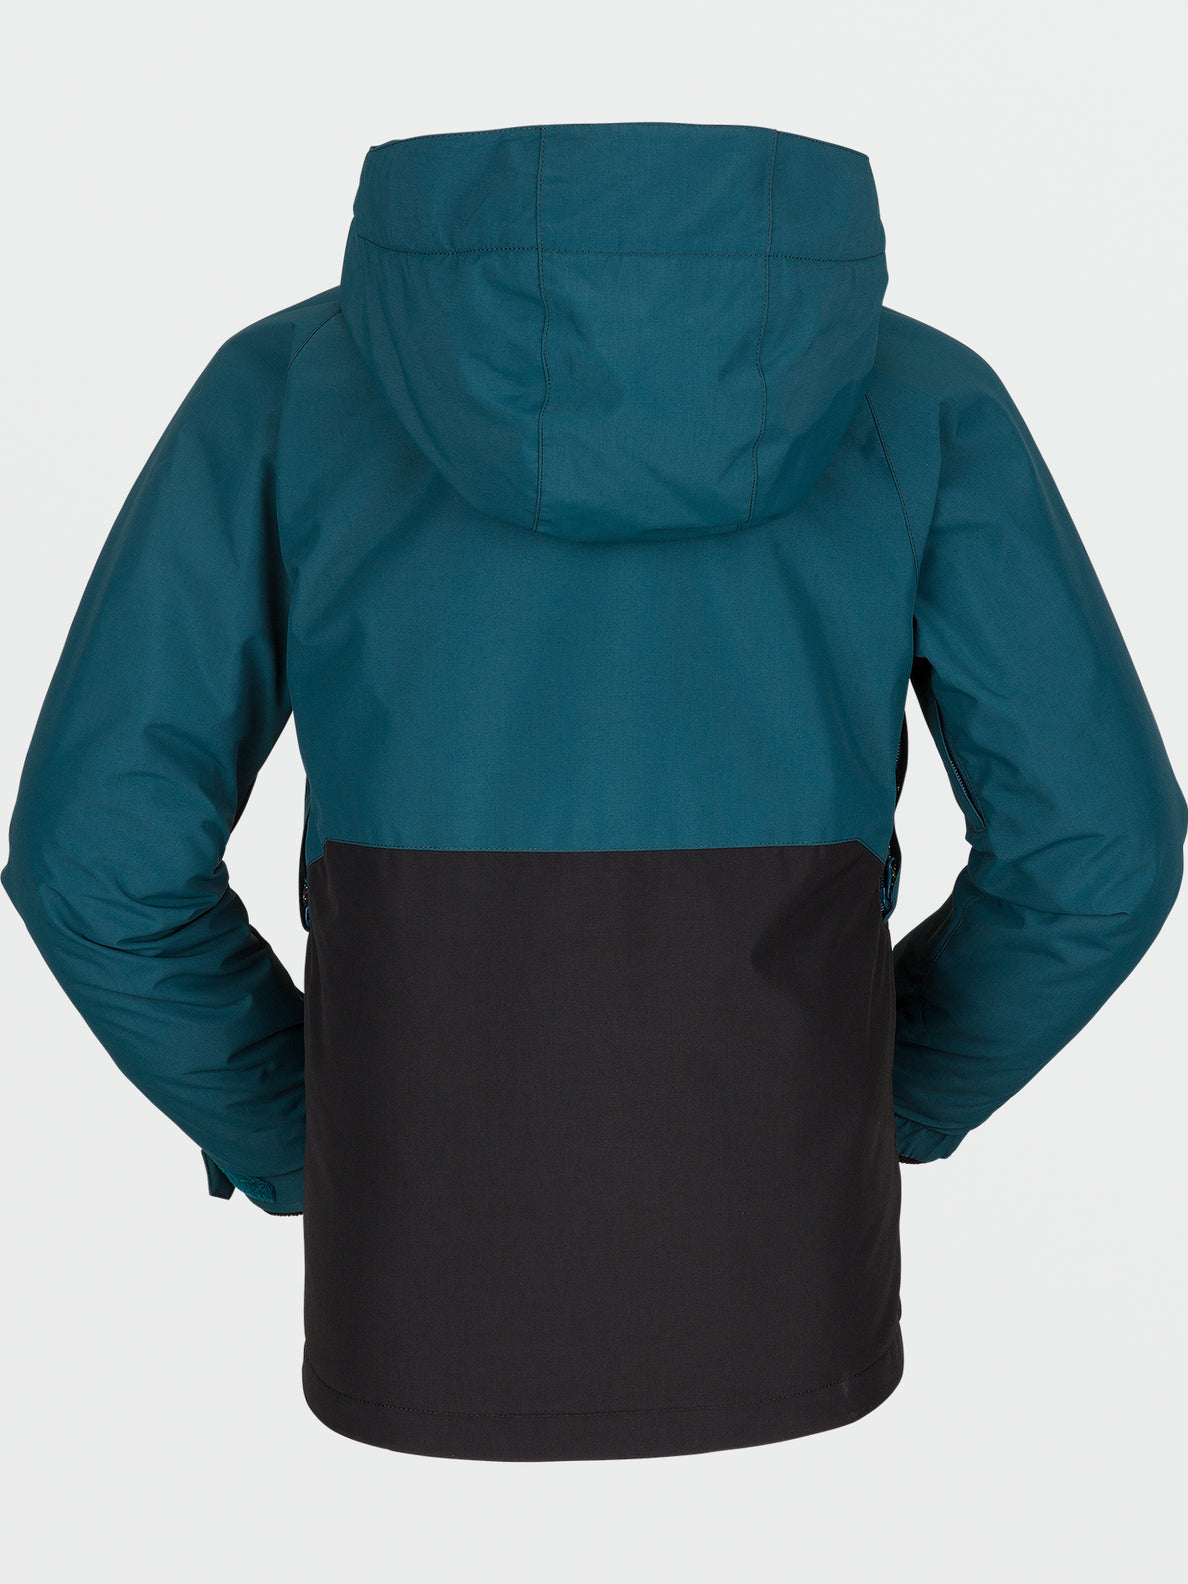 Kids Breck Insulated Jacket - Storm Blue